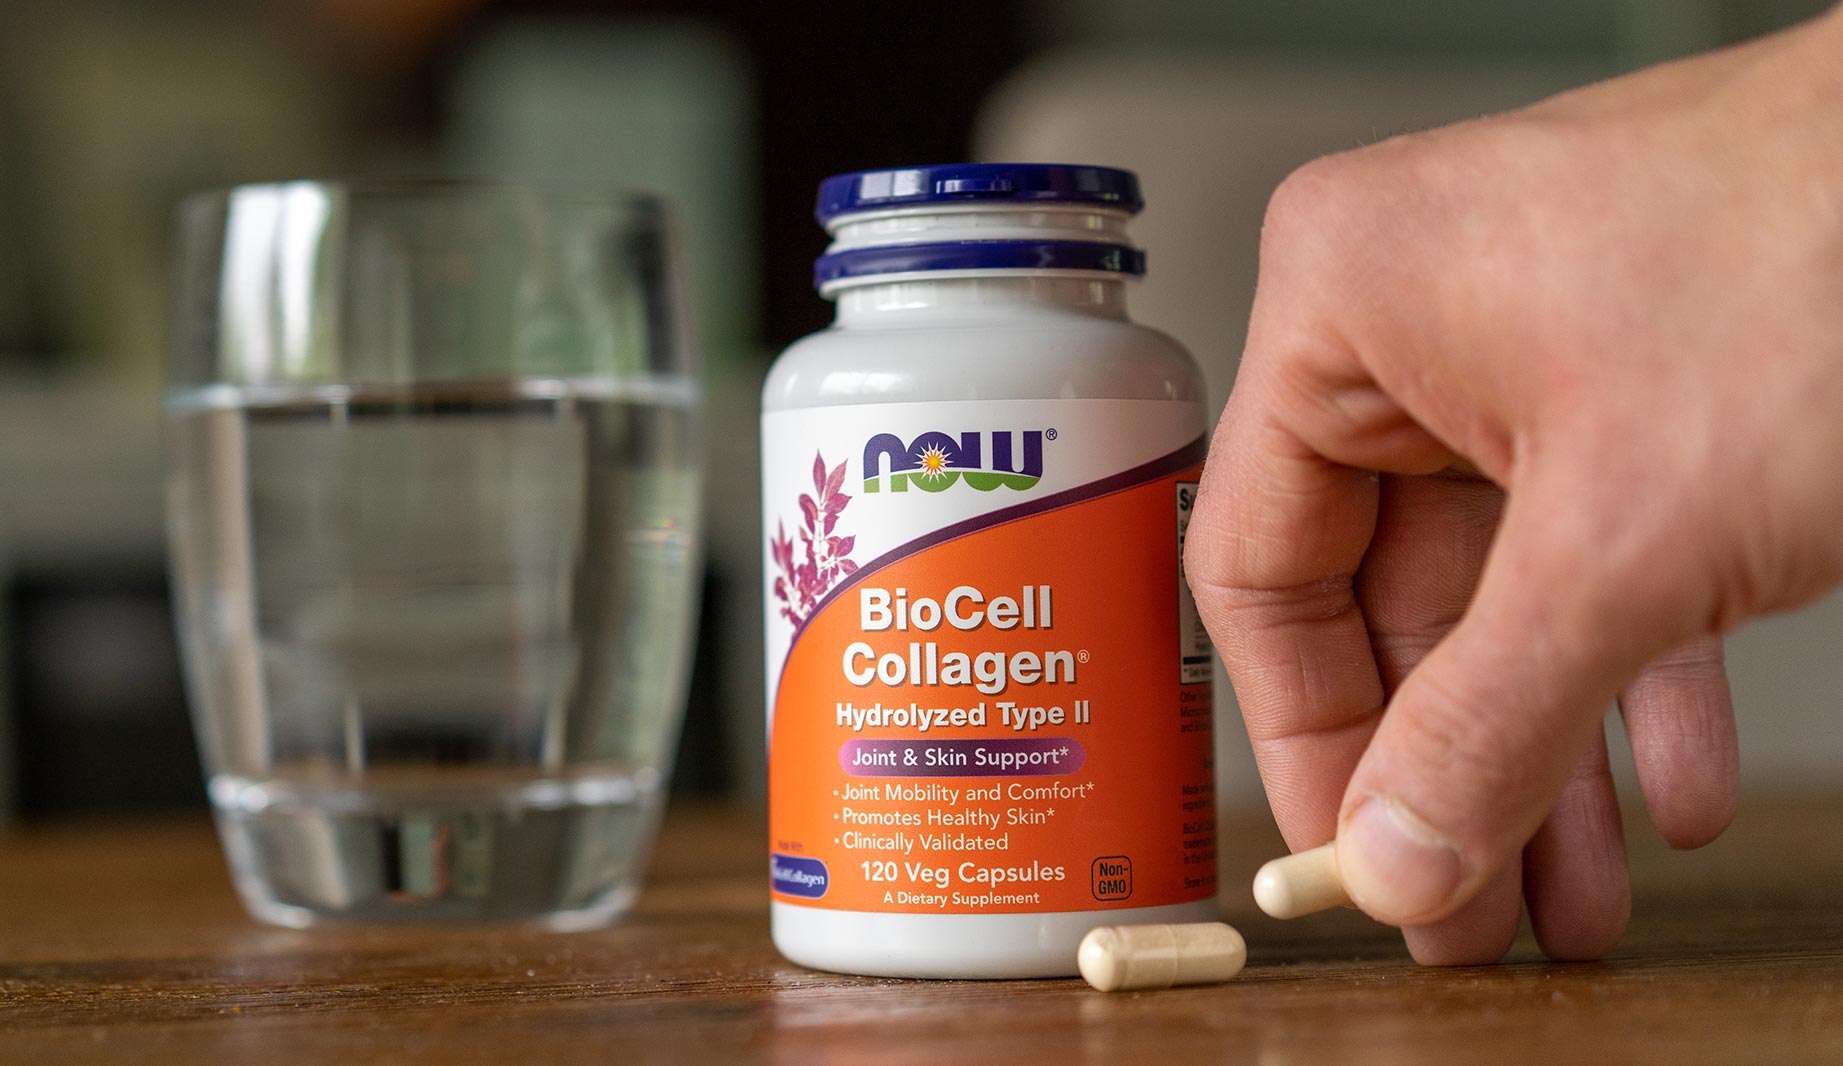 glass of water next to a bottle or NOW BioCell Collagen with hand picking up a pill